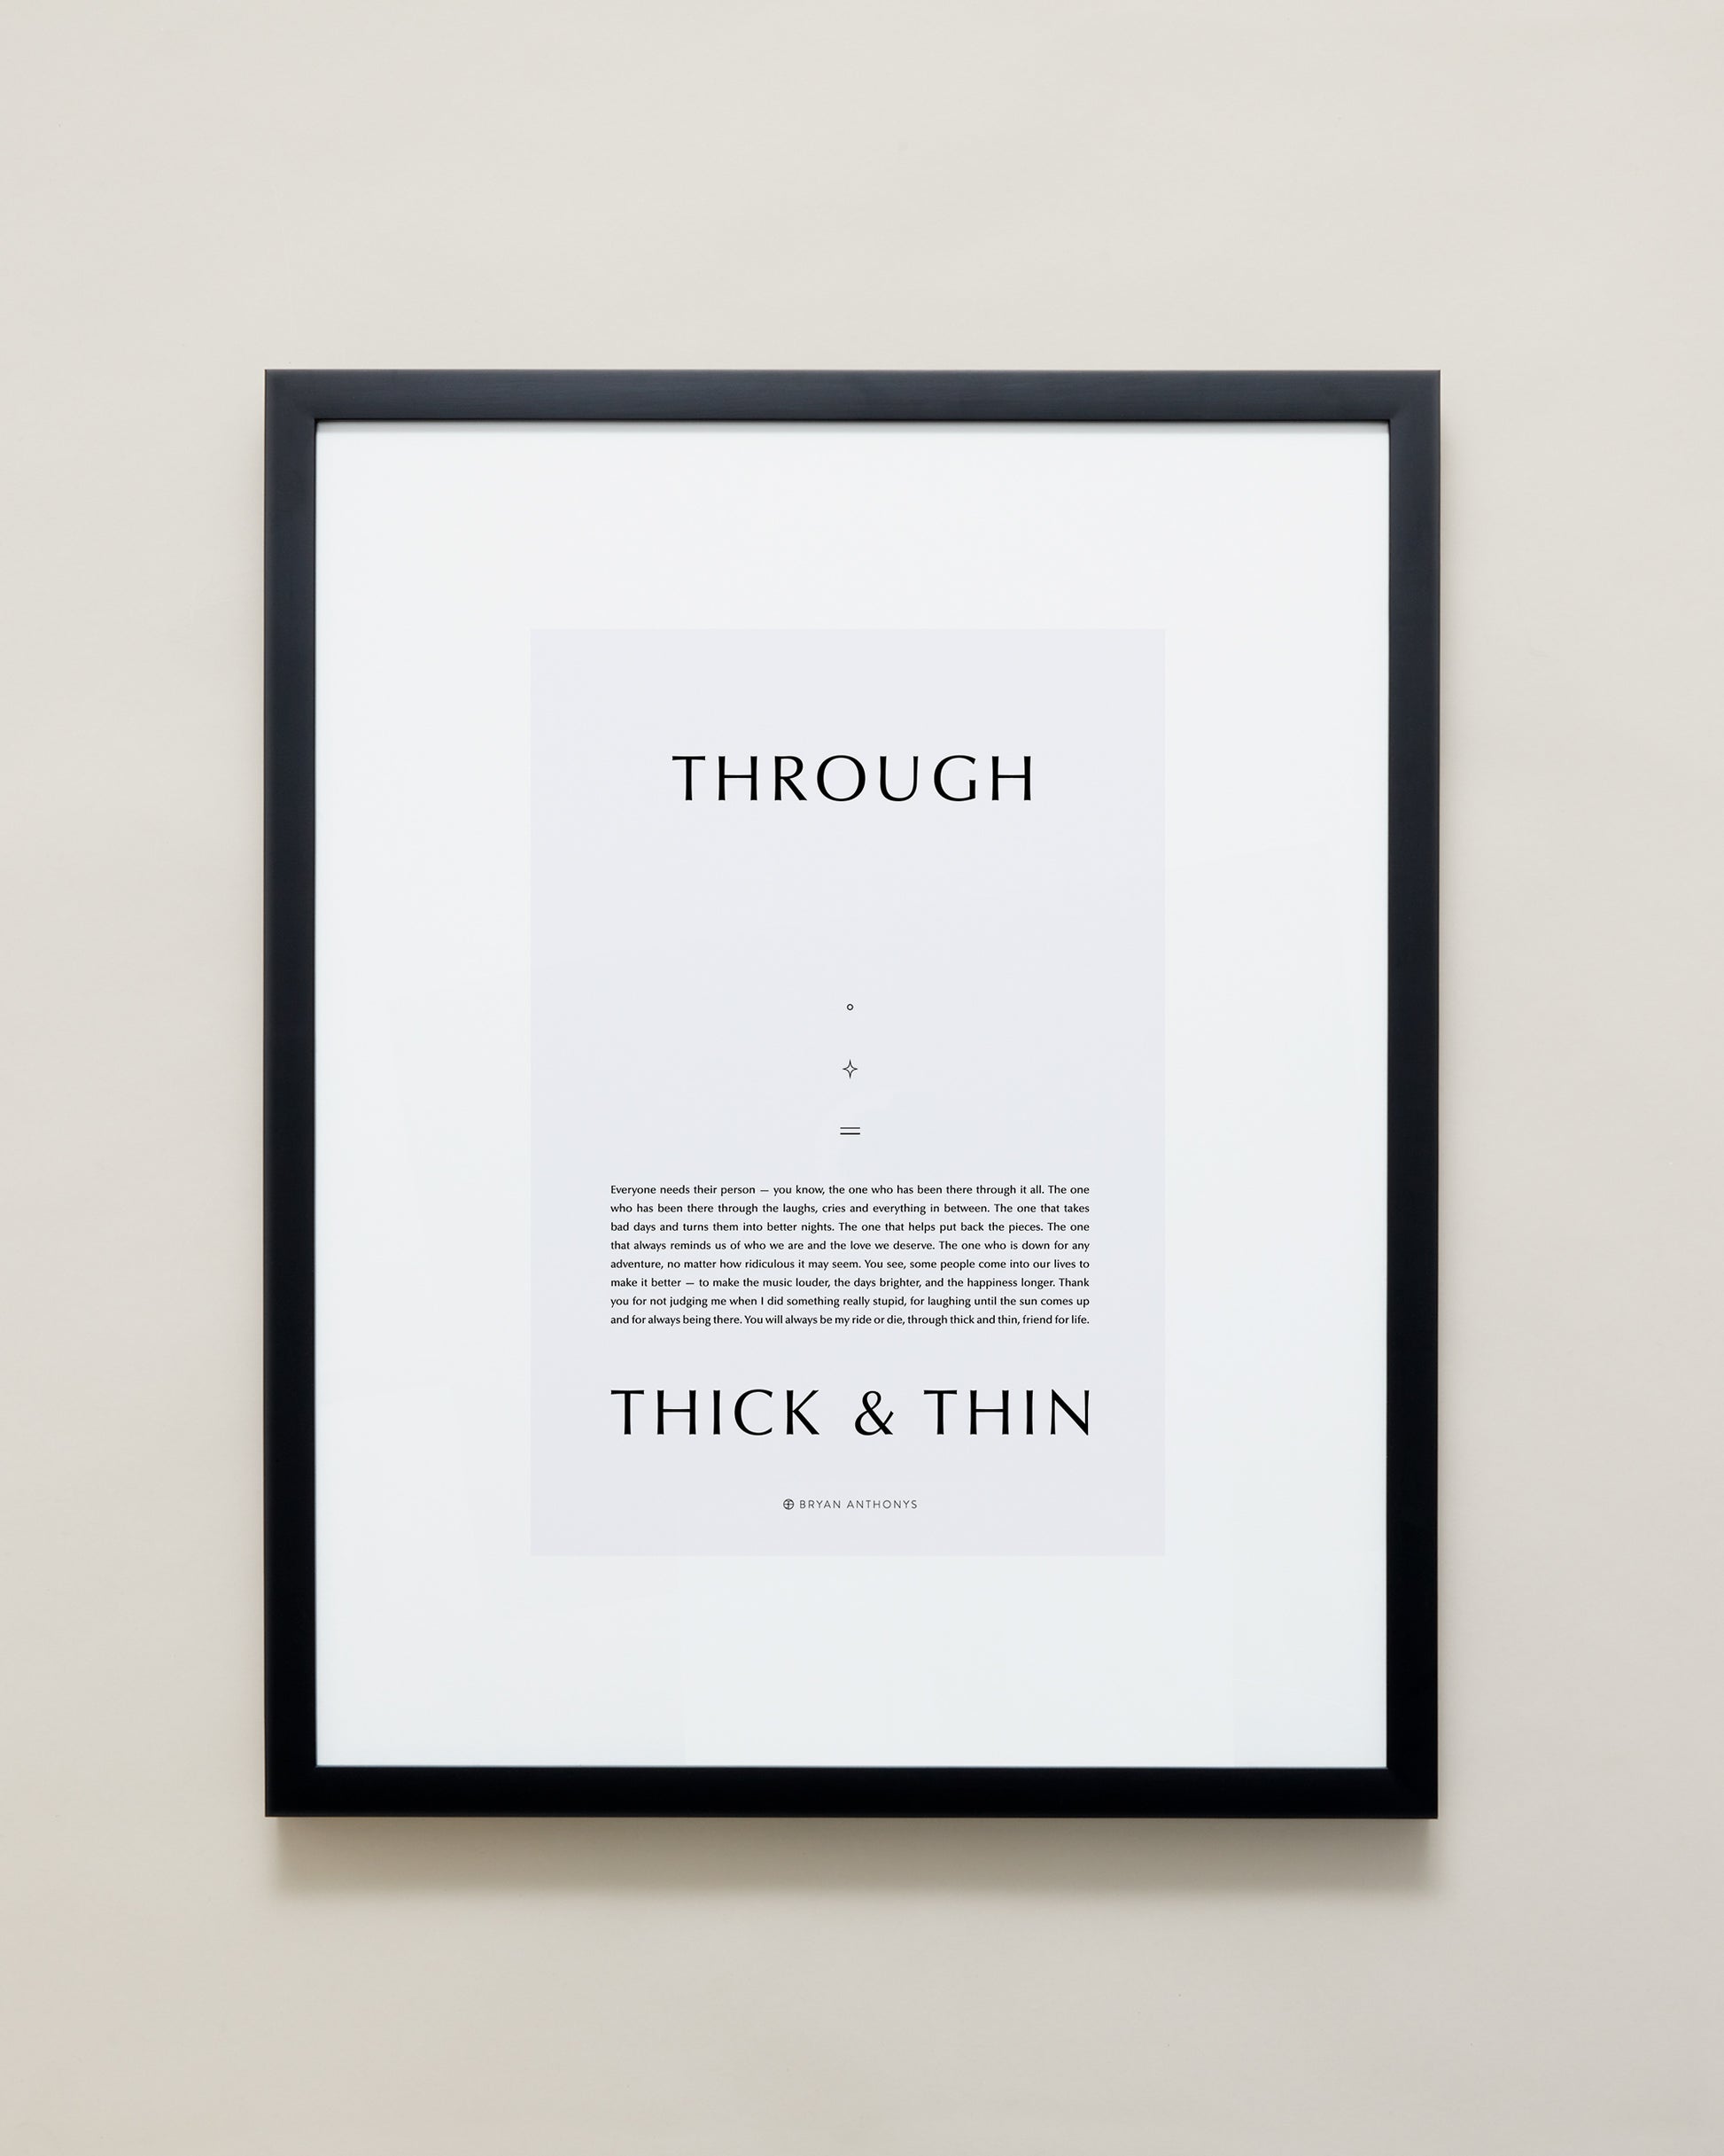 Bryan Anthonys Home Decor Through Thick and Thin Framed Print 16x20 Black with Gray